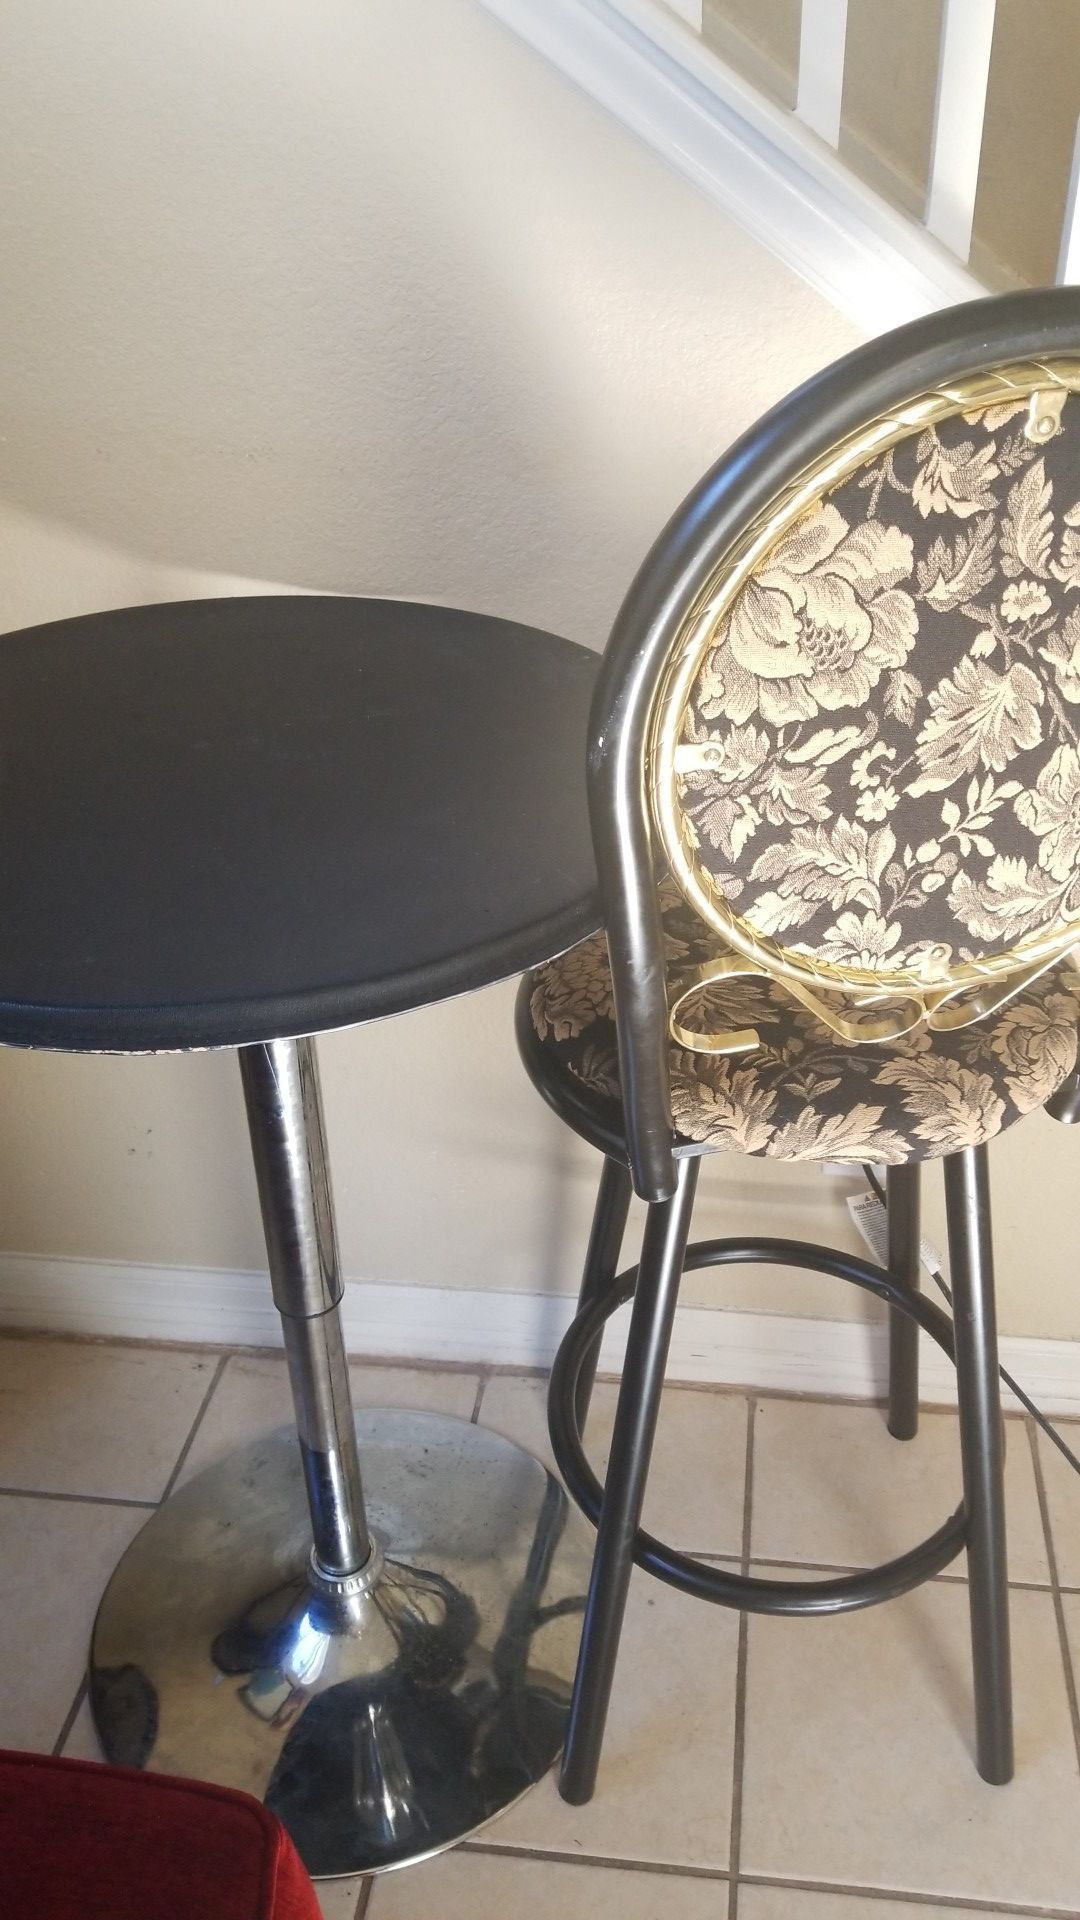 Round bar table and stool. Most go